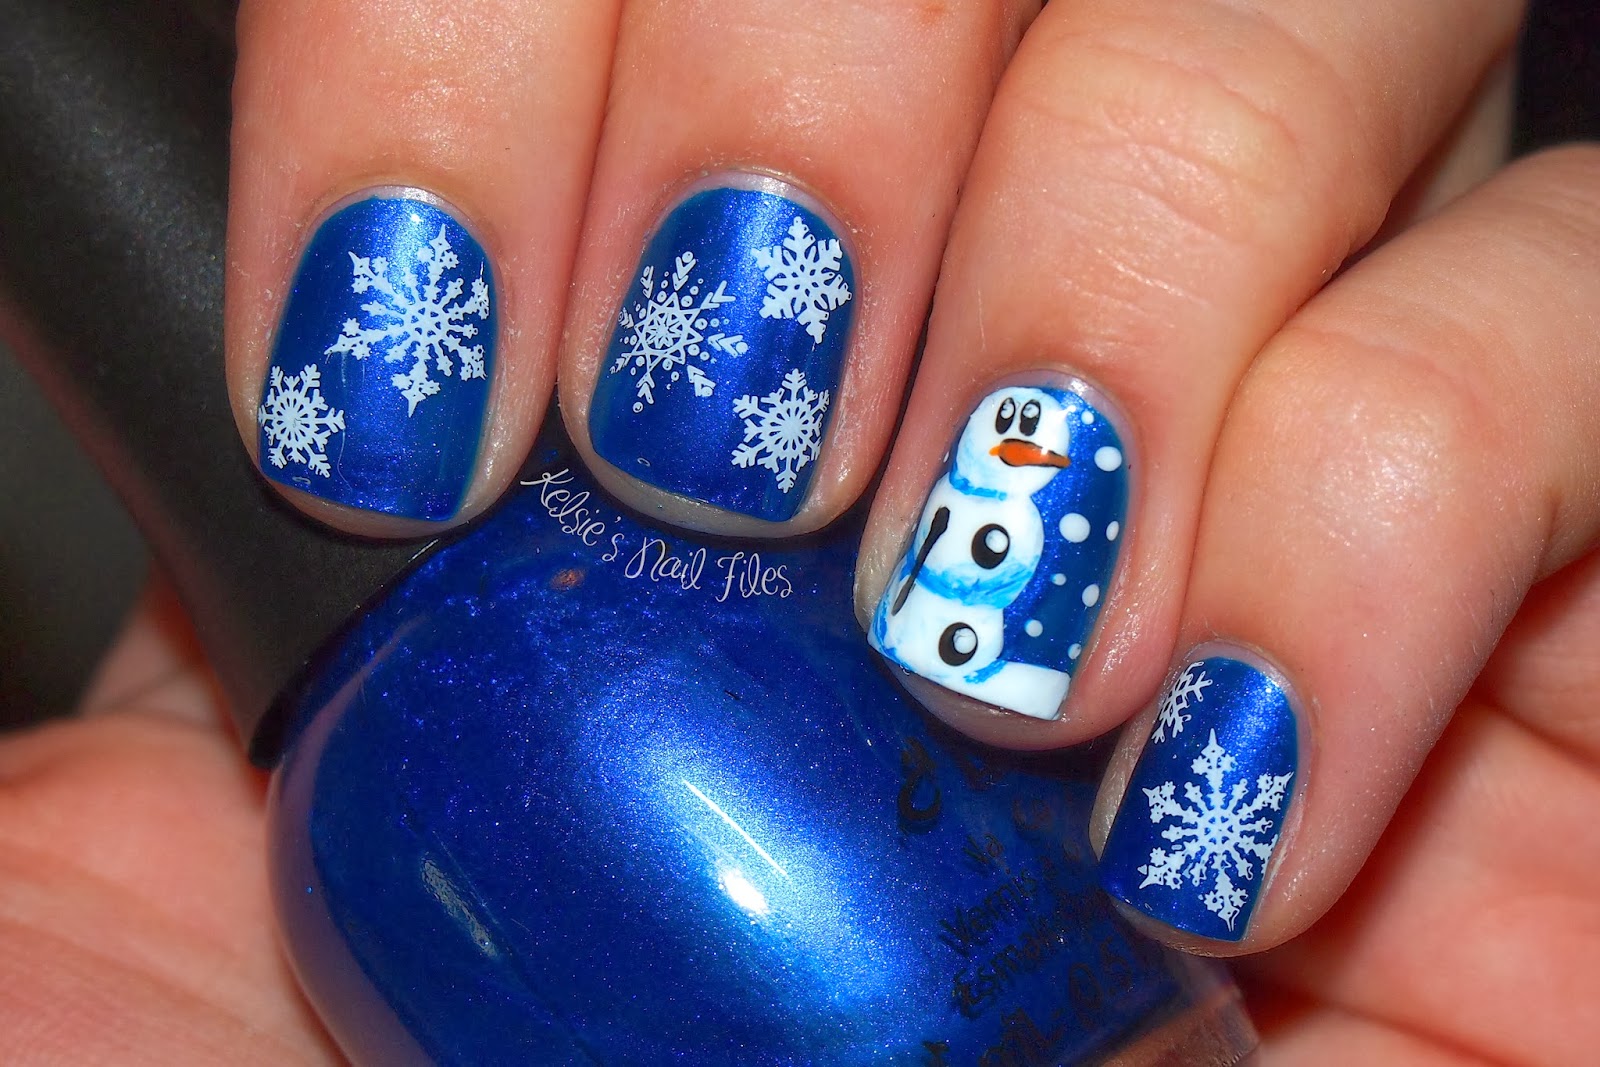 3. Winter Nail Designs for Short Nails with Snowflakes - wide 6